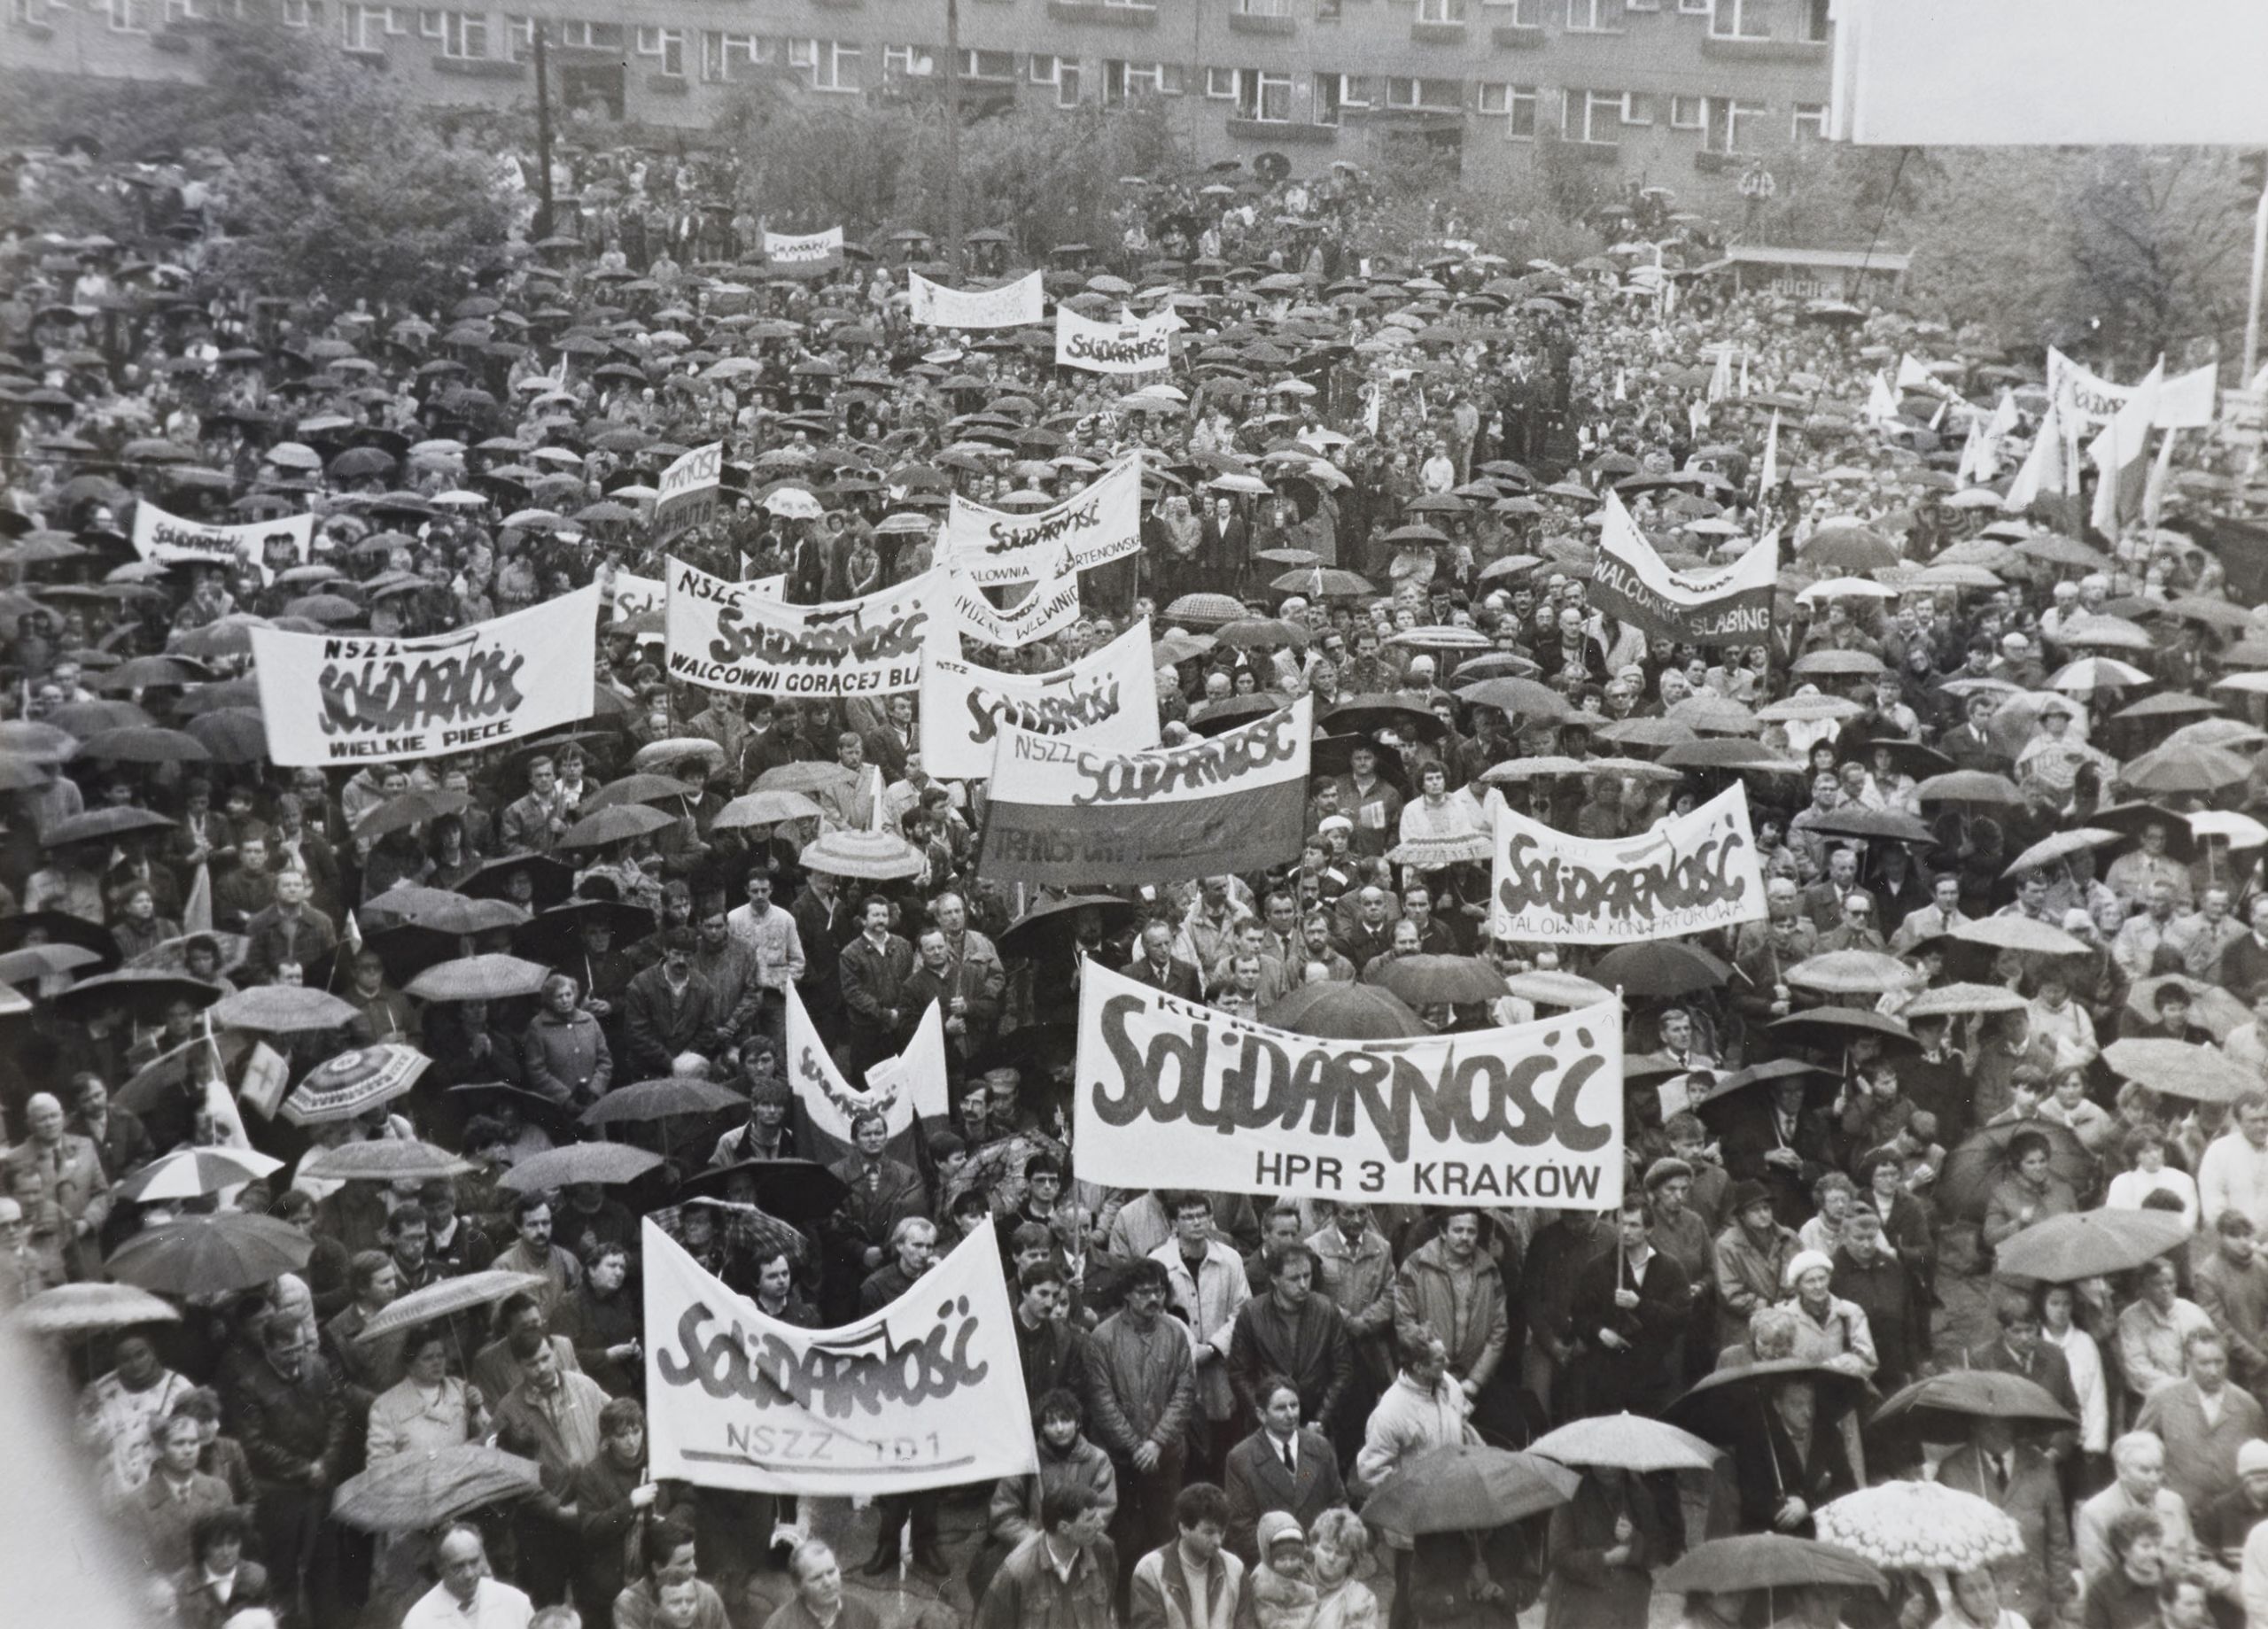 Solidarity Demonstration, Kraków, Poland, from May, 1989. From the European Pictorial Collection, Hoover Institution Archives.